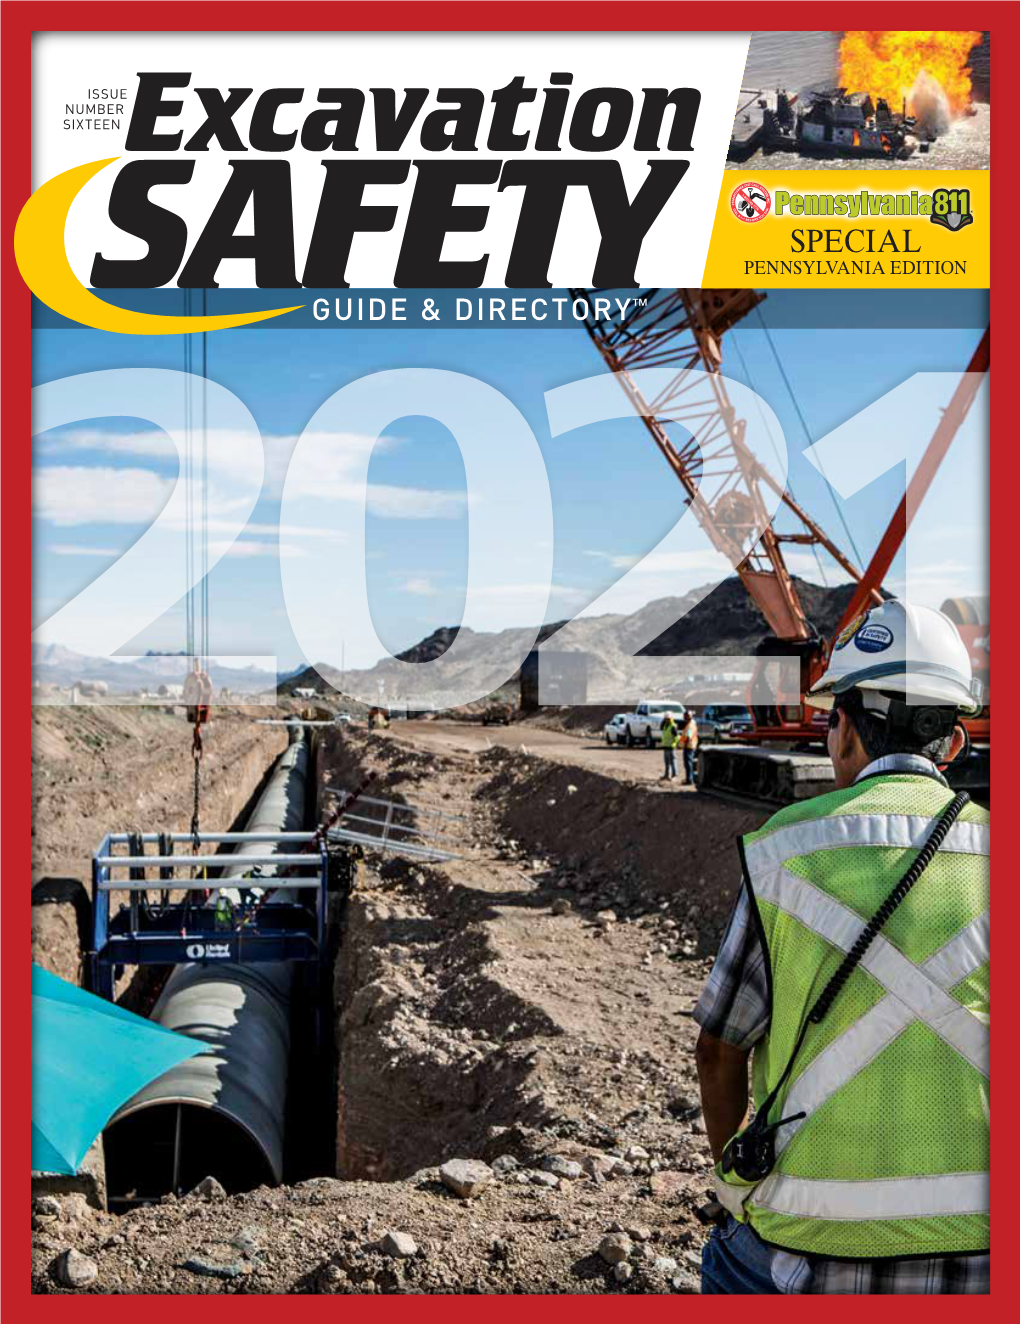 Excavation Safety Guide Also Provides a Safety You May Need to Conduct a Pre-Excavation Ect Before Excavating